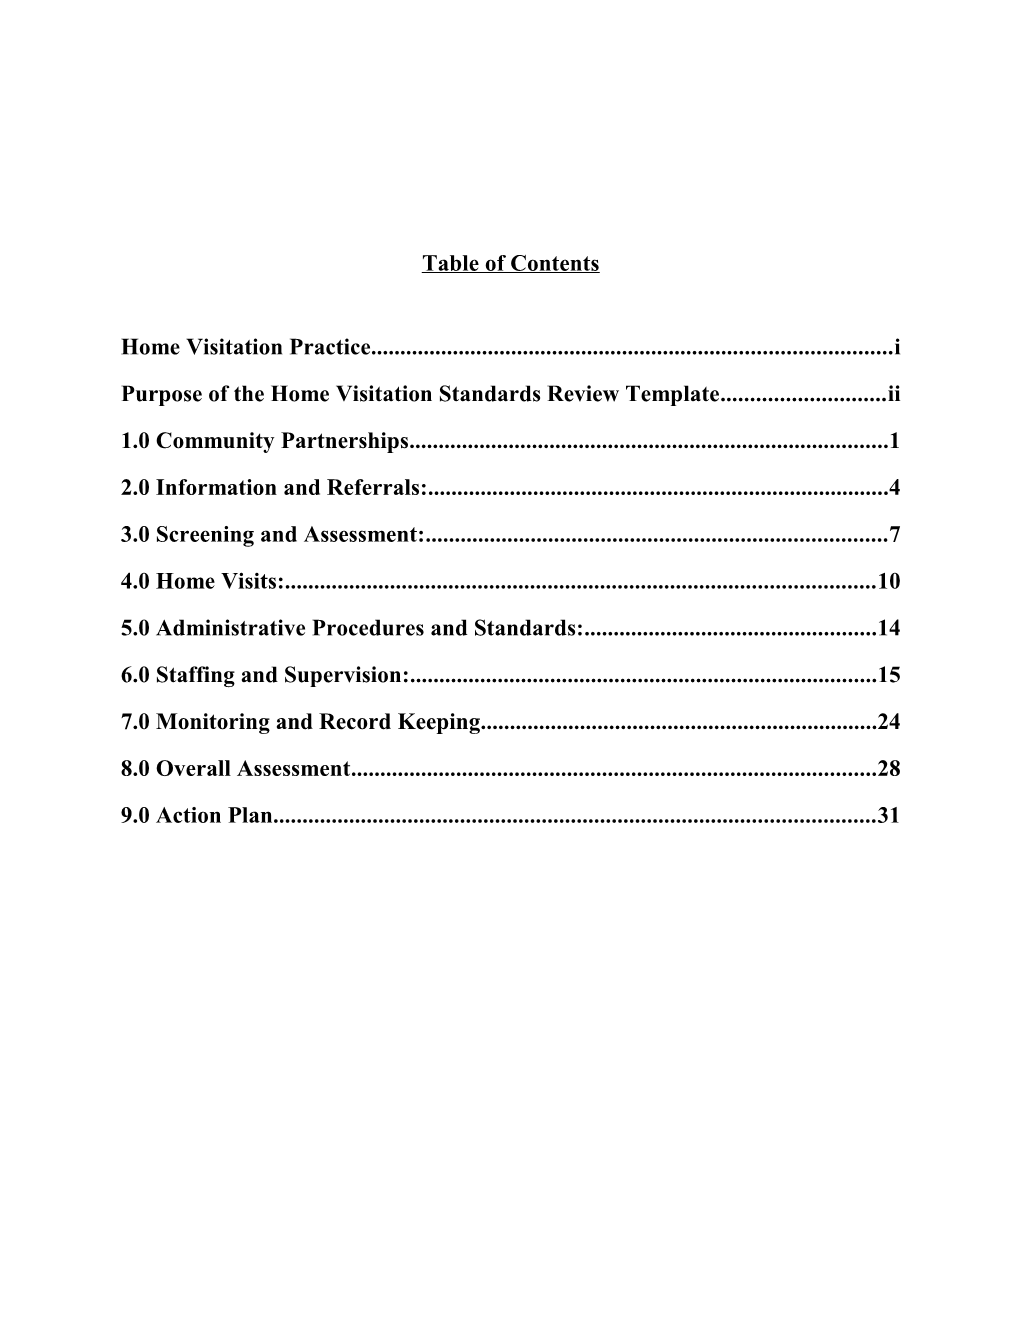 Purpose of the Home Visitation Standards Review Template